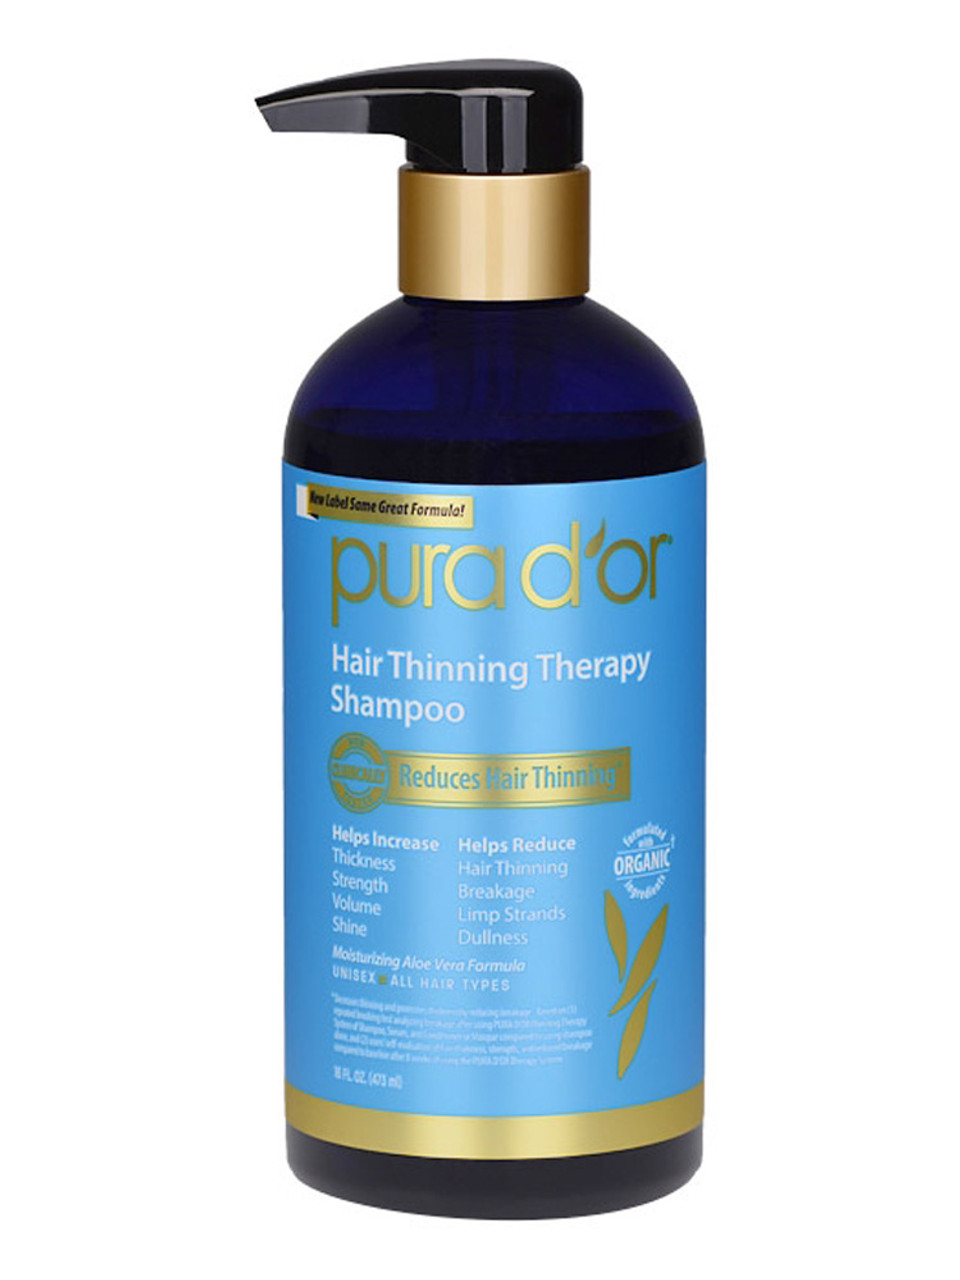 Pura D'or Hair Thinning Therapy Shampoo - 16 oz - The Online Drugstore ©